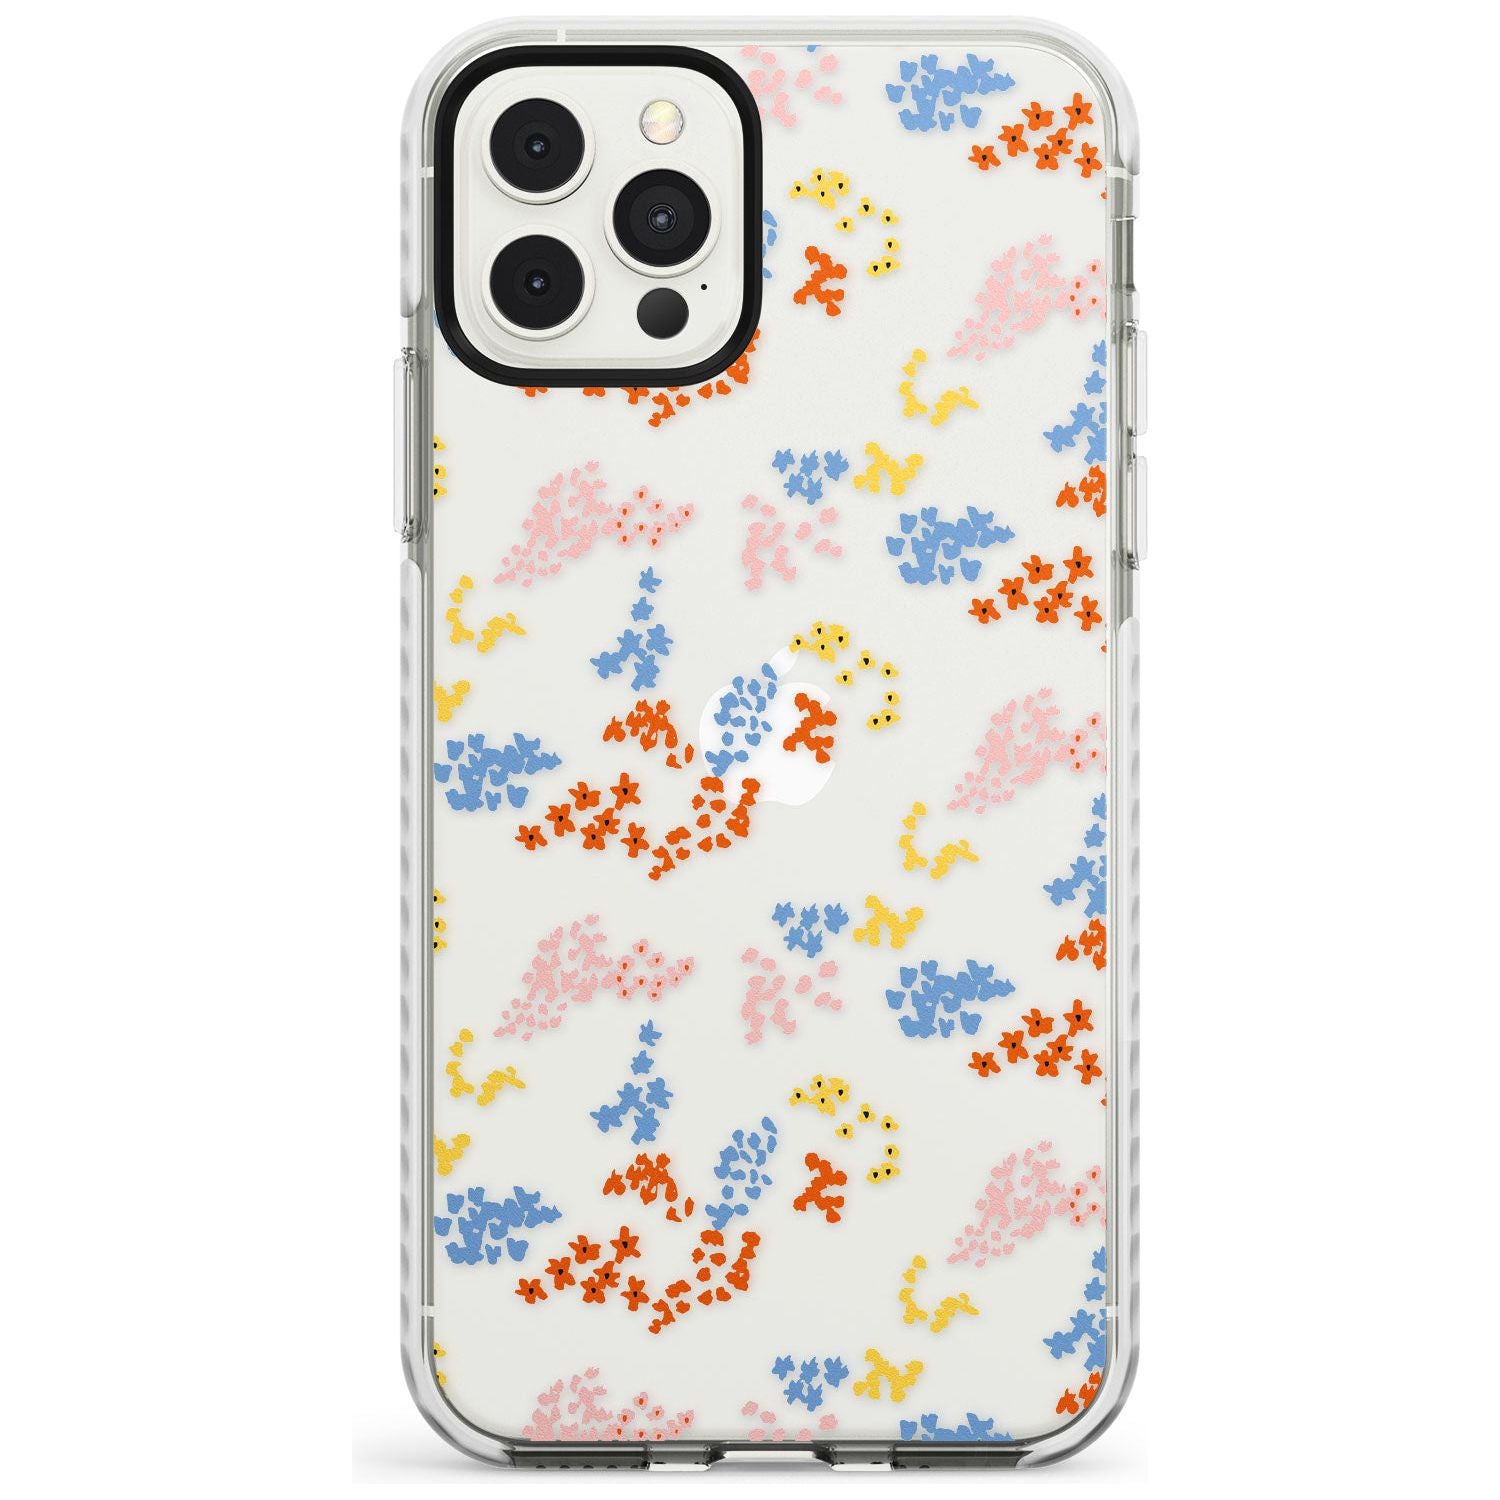 Small Flower Mix: Transparent Slim TPU Phone Case for iPhone 11 Pro Max